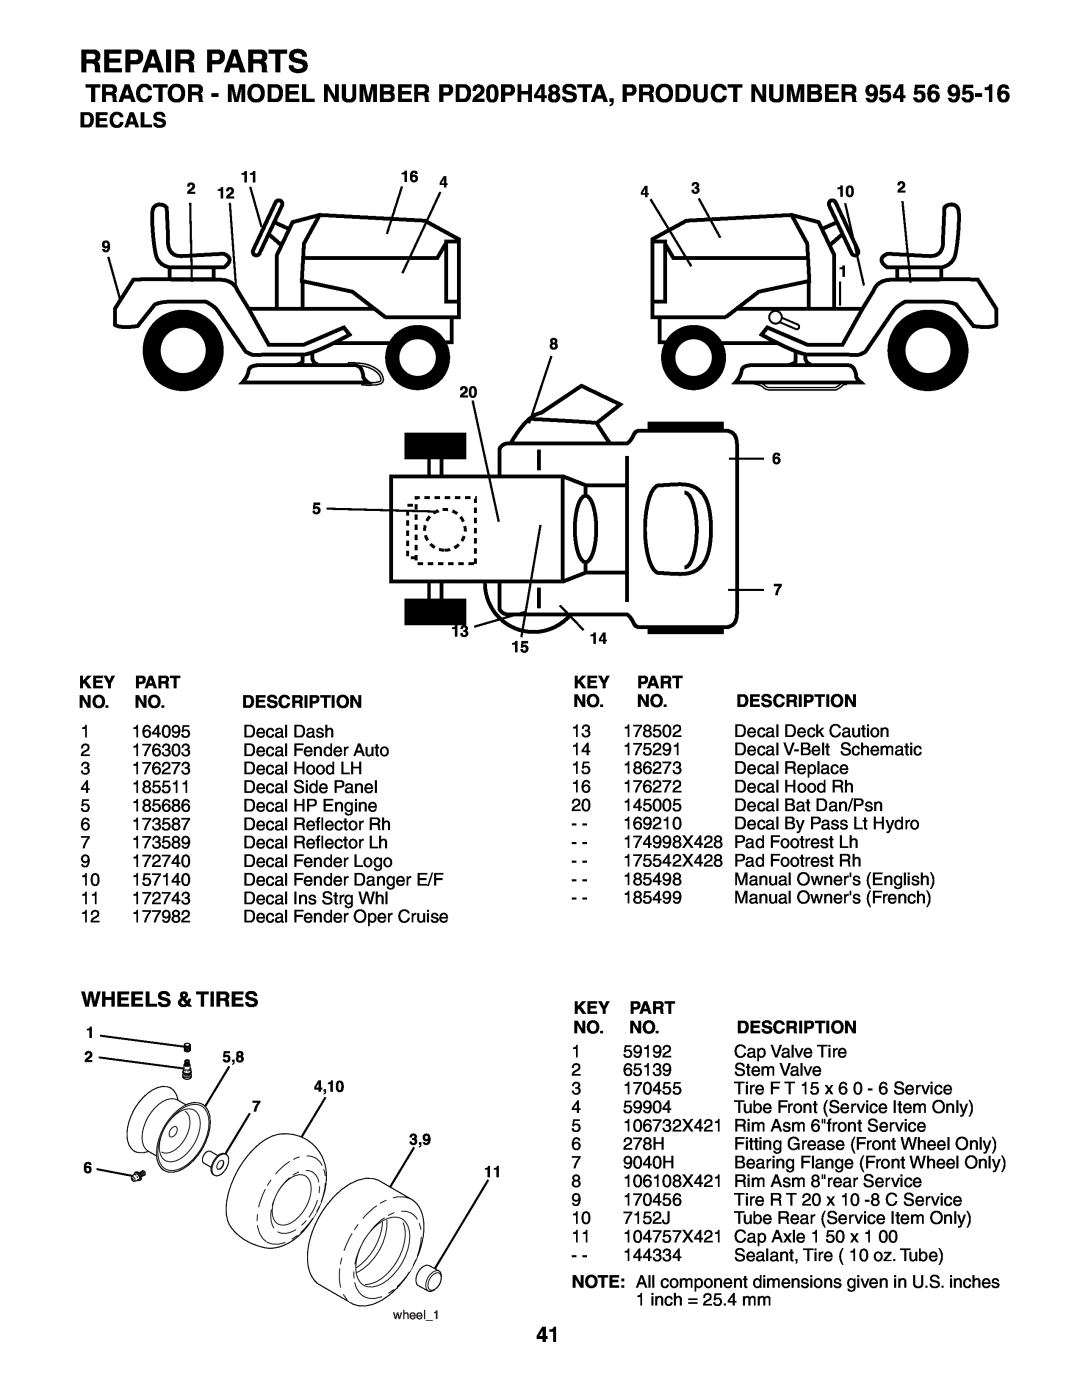 Poulan 185498 Decals, Wheels & Tires, Repair Parts, TRACTOR - MODEL NUMBER PD20PH48STA, PRODUCT NUMBER 954 56, 4,10 